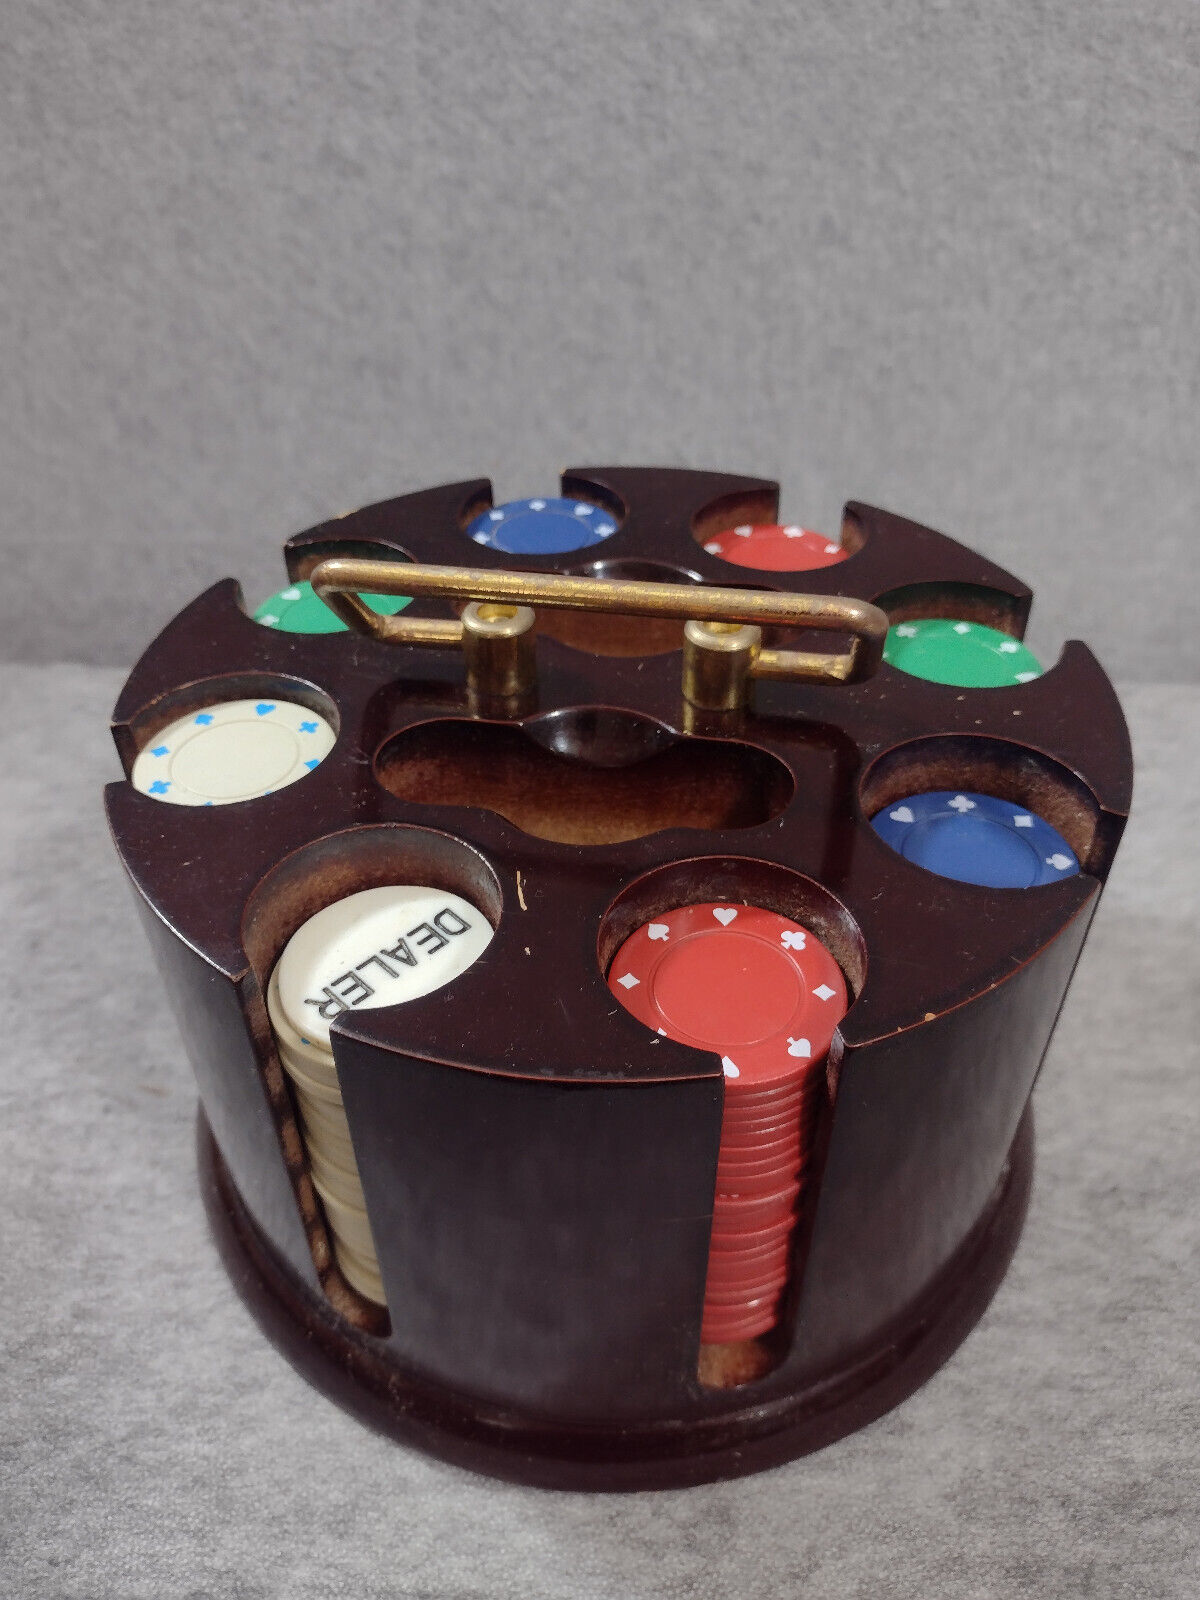 Vintage Spinning Wood Carousel Poker Chip and Card Caddy 200 multicolor chips